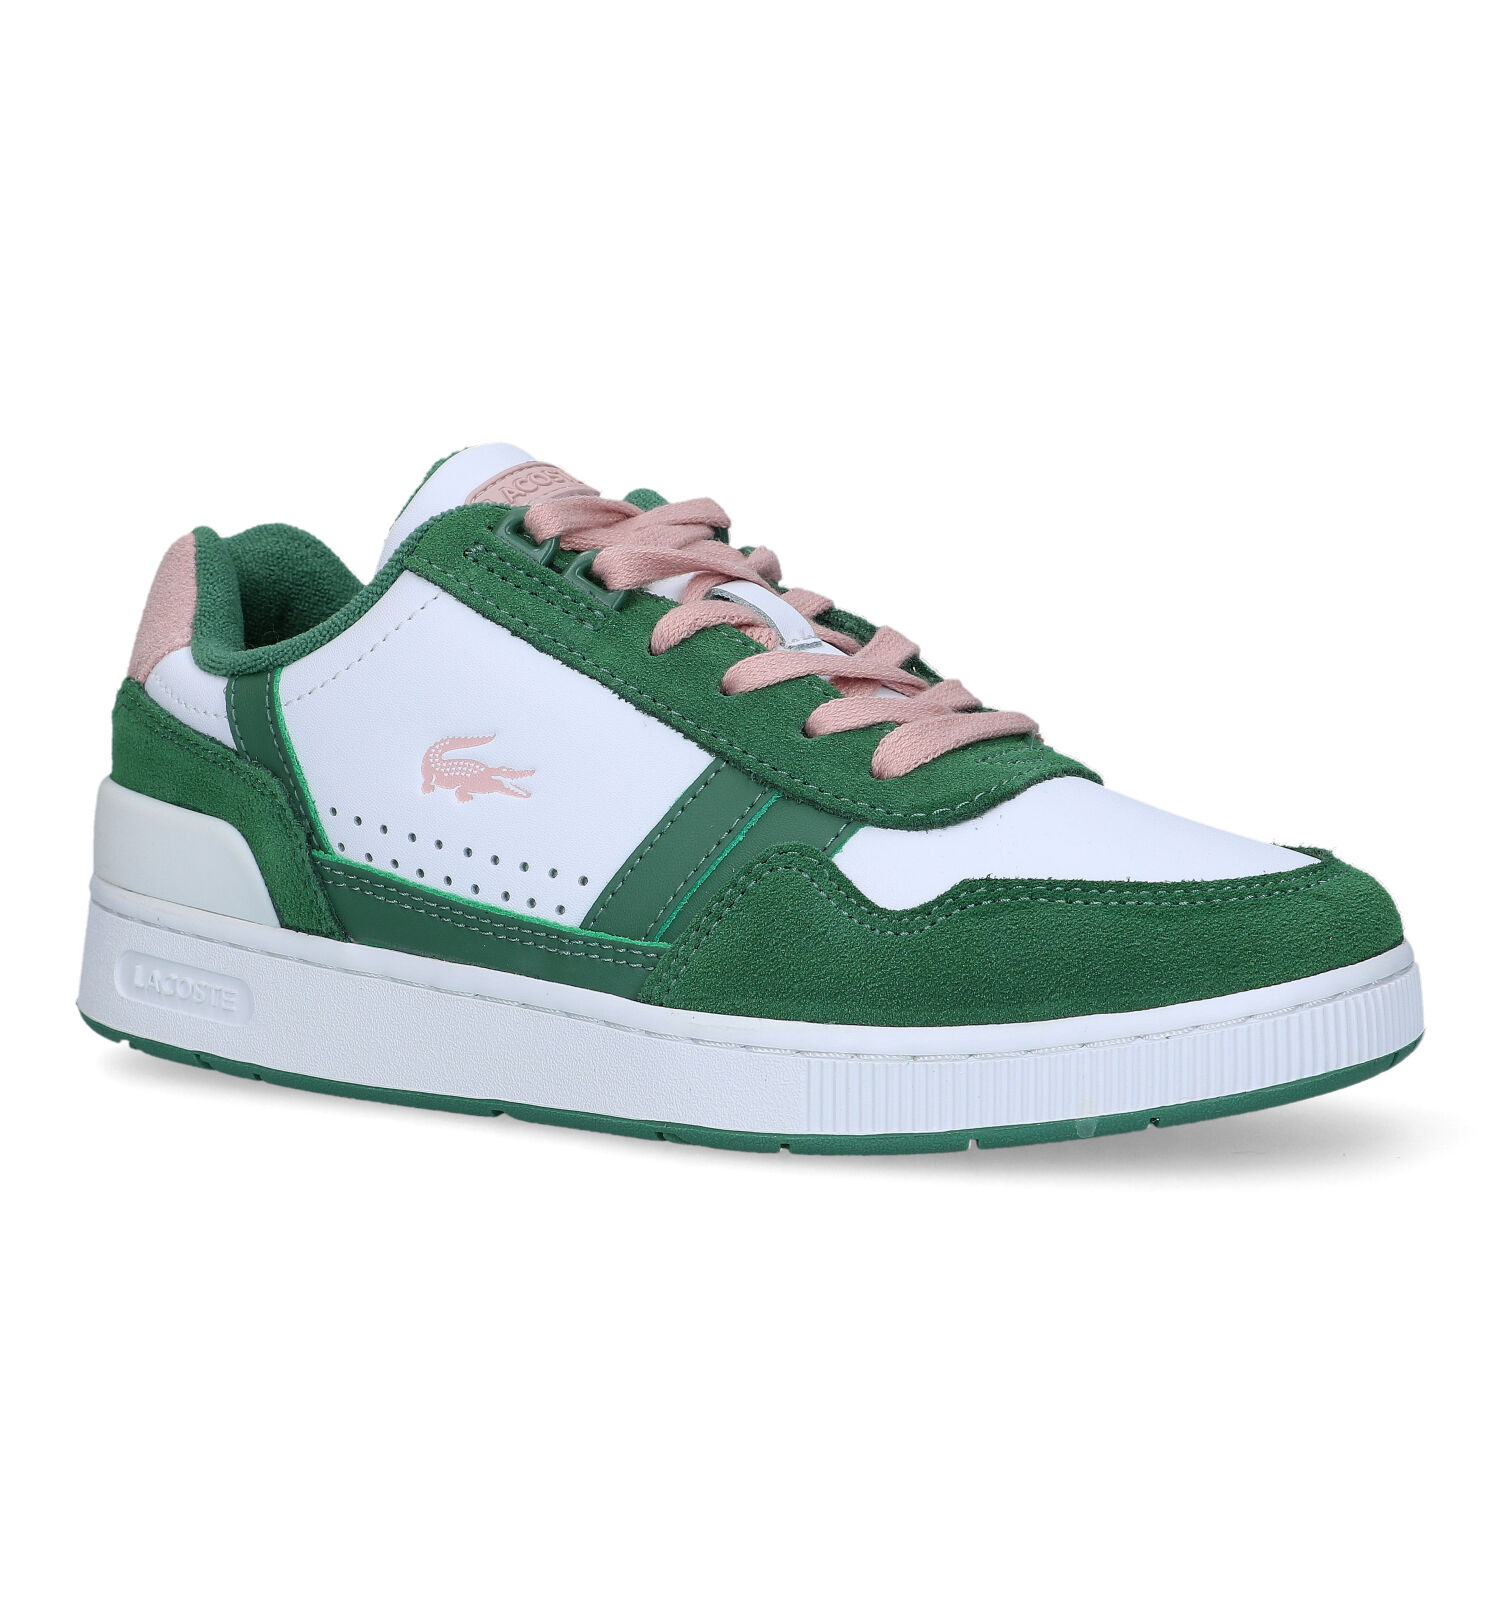 Ontvangende machine Tact Picasso Lacoste T-Clip Groene Sneakers | Dames Sneakers